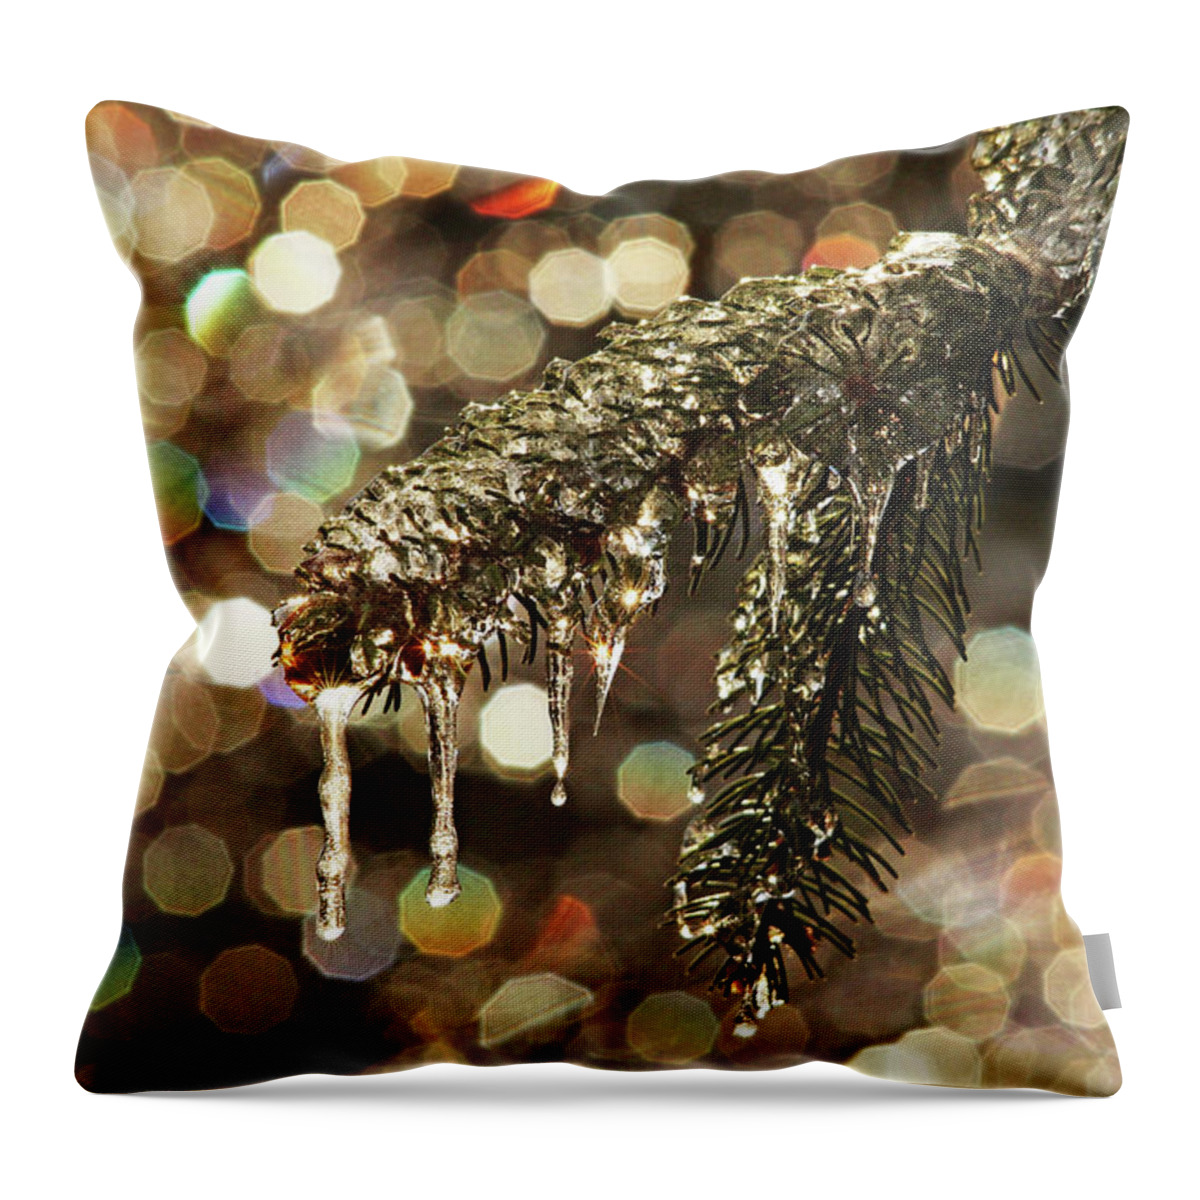 Spruce Tree Throw Pillow featuring the photograph Glitzy Nature by Debbie Oppermann